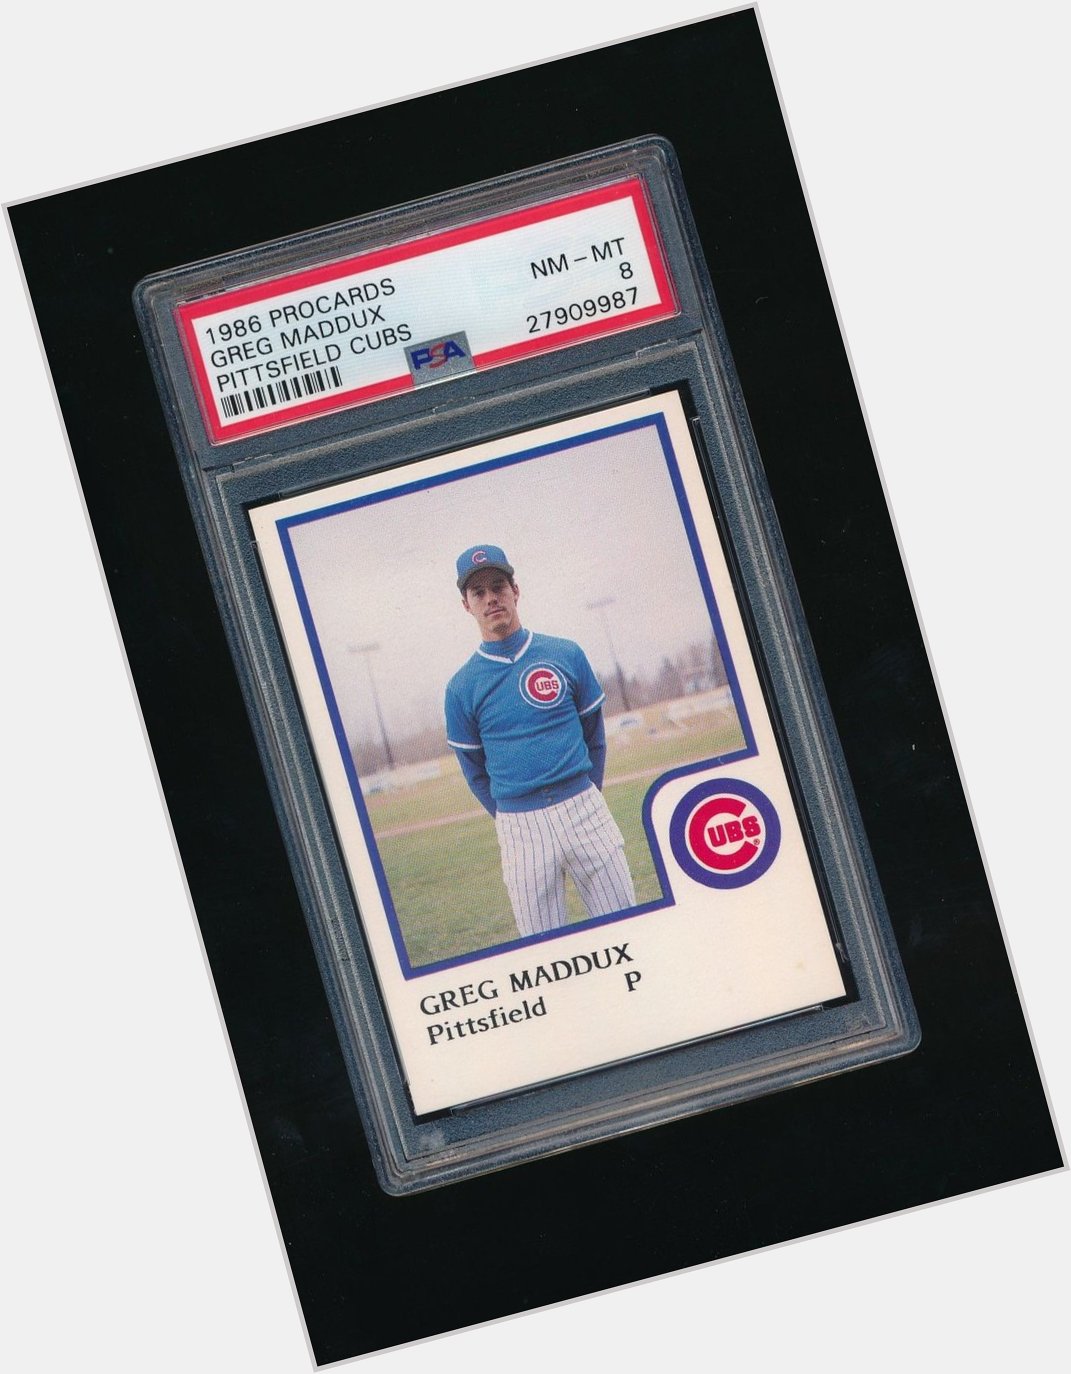 Happy 52nd birthday to Greg Maddux of the Pittsfield Cubs:  